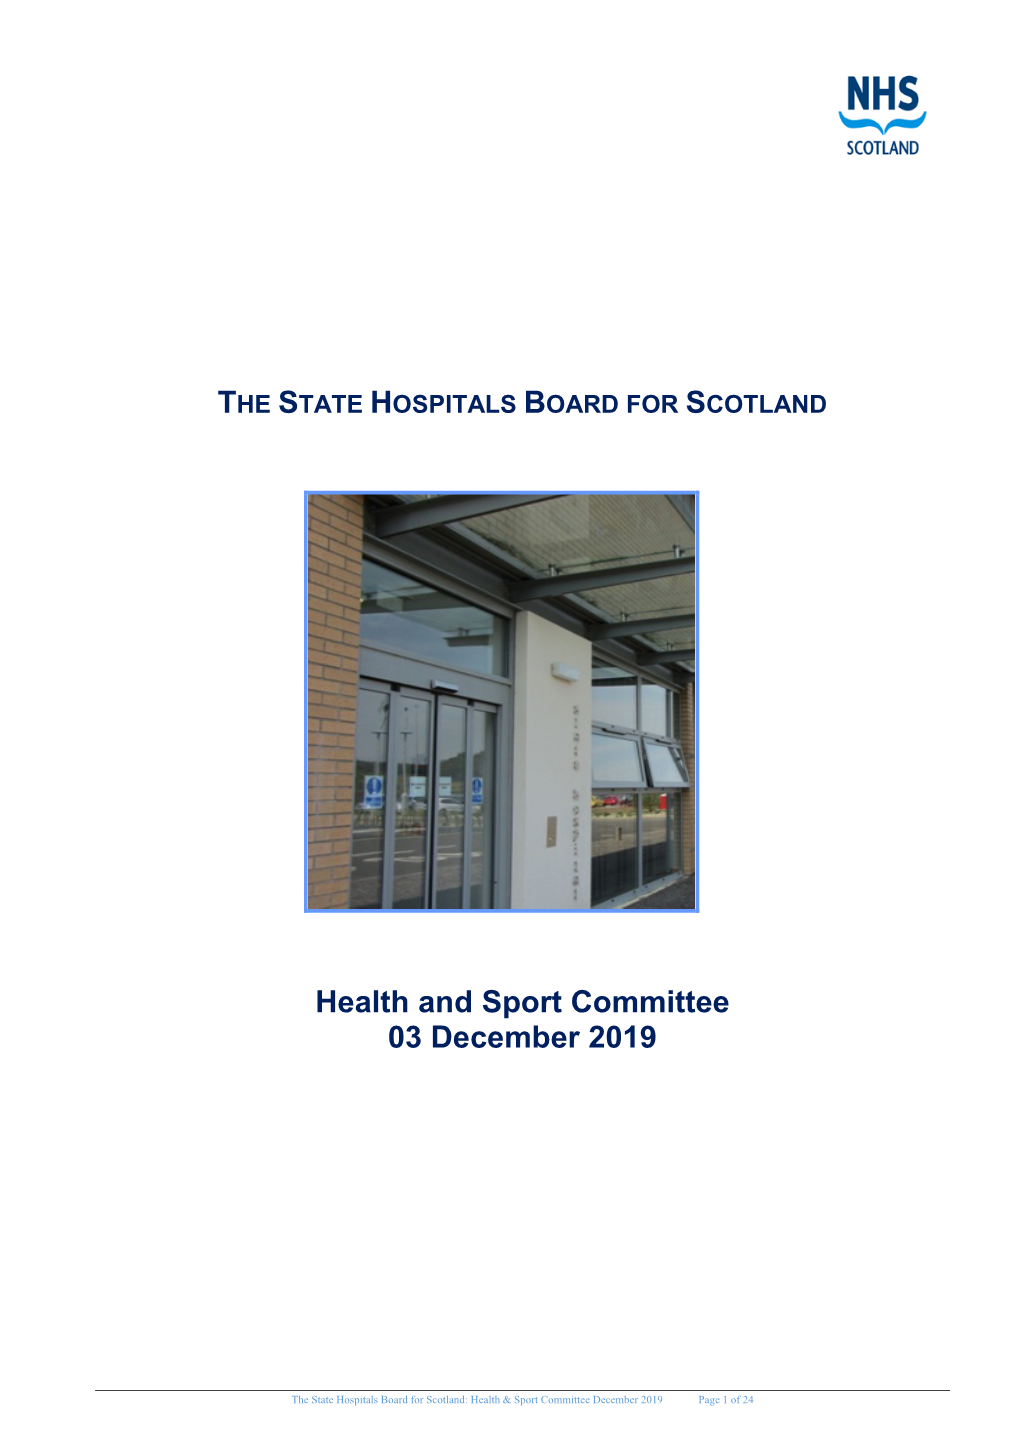 Health and Sport Committee 03 December 2019